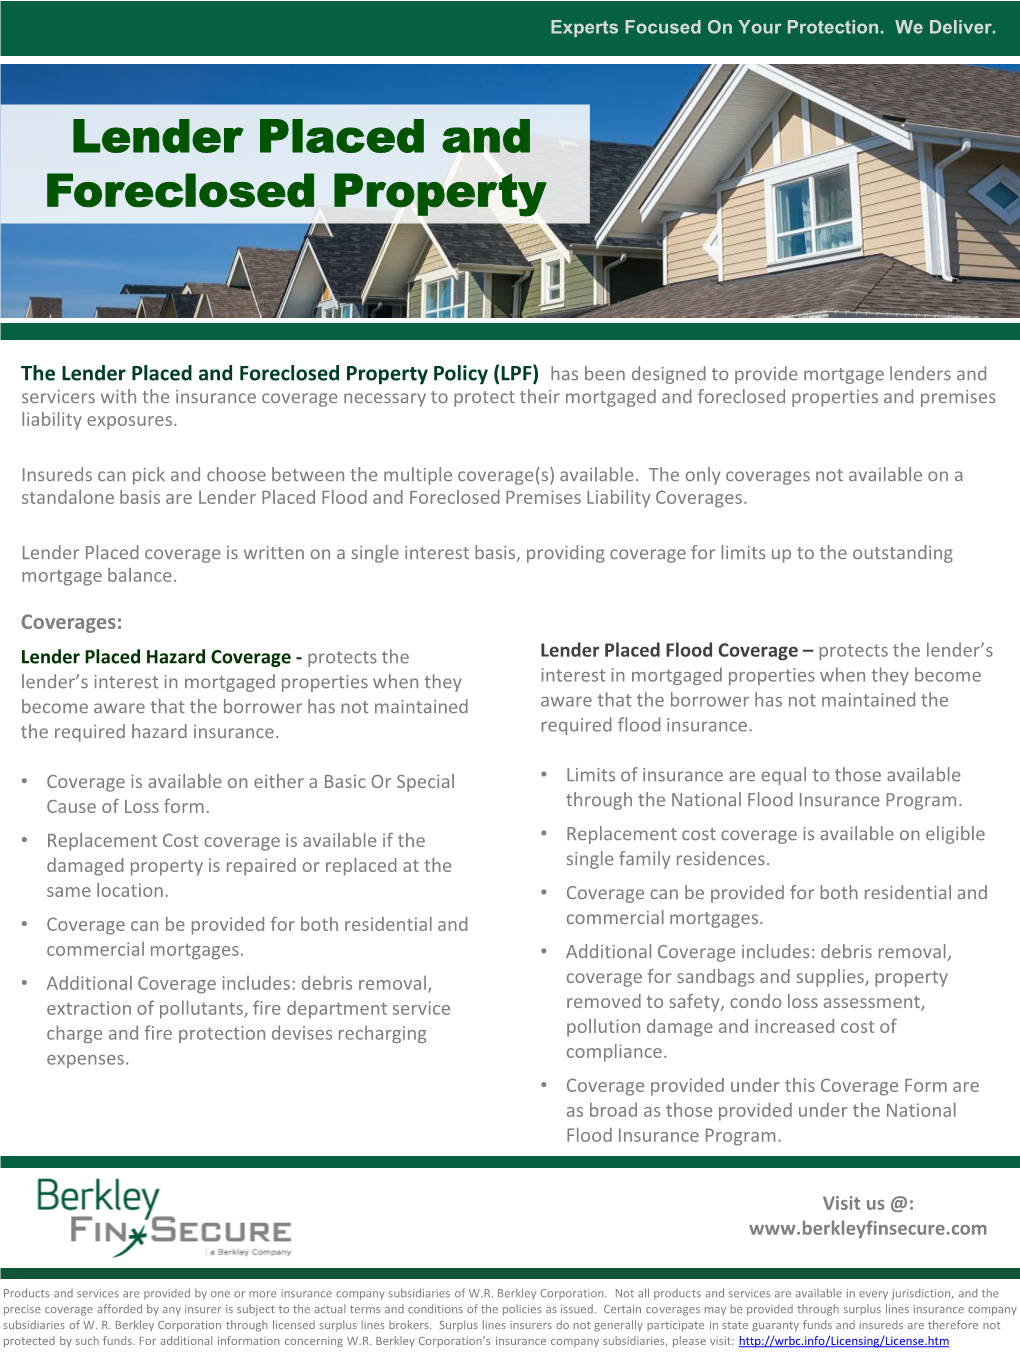 Lender Placed and Foreclosed Property